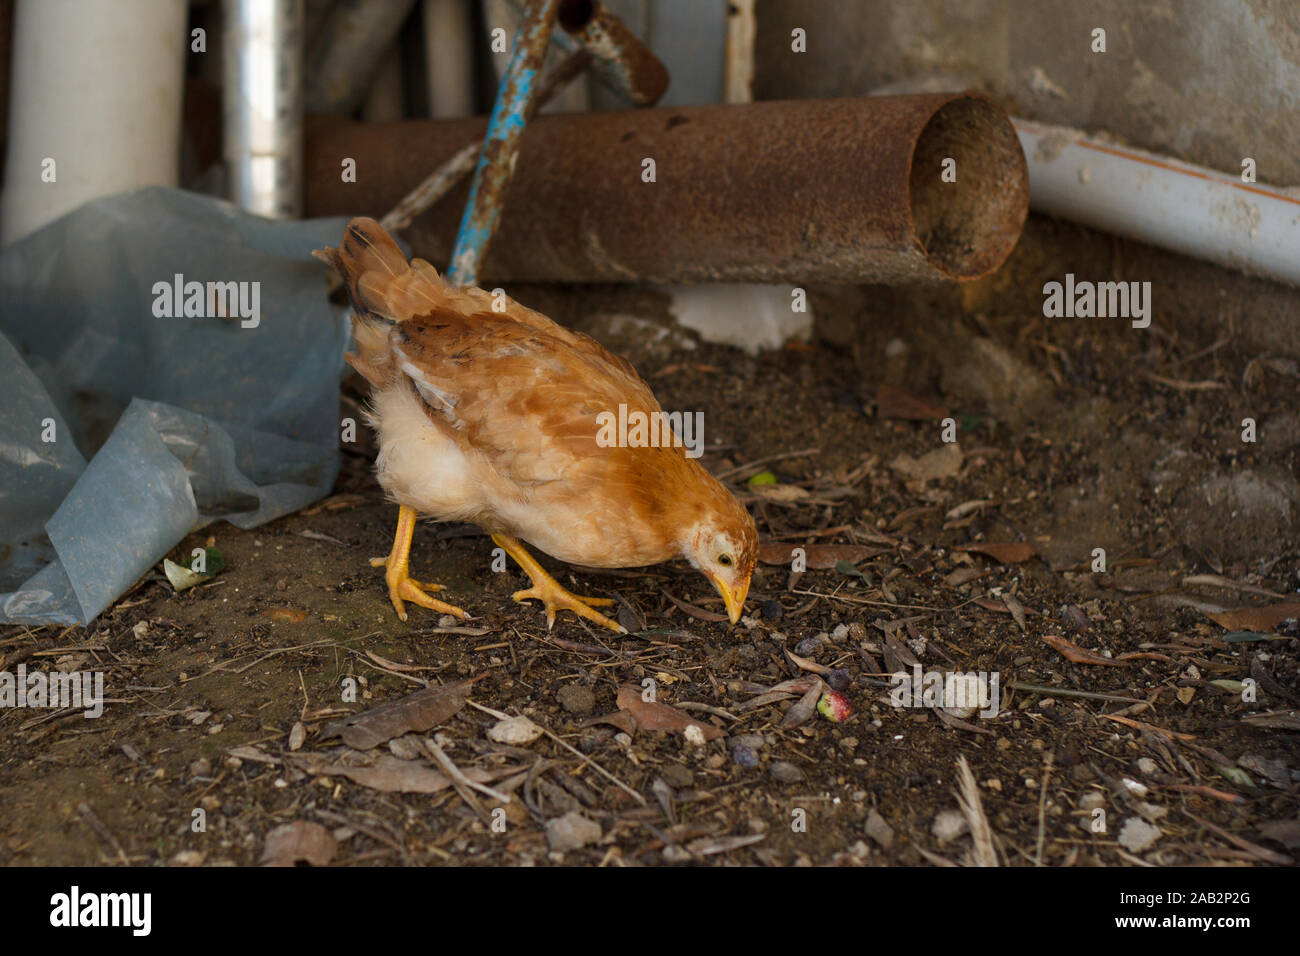 Little red chicken pecking the ground in old farm barn with rusty metal pipe. Farming. Poultry Stock Photo